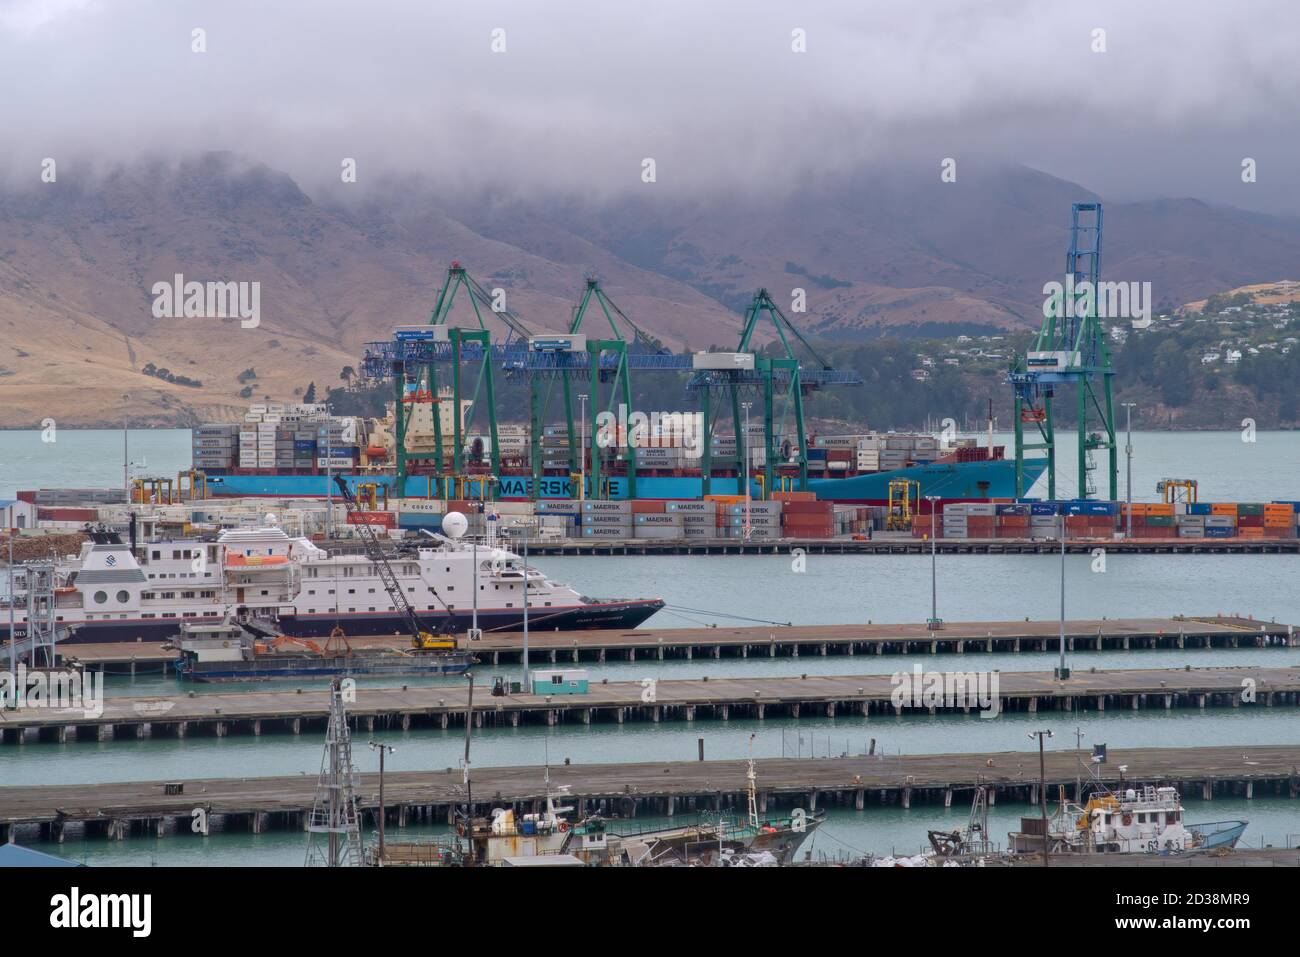 Lyttelton, Canterbury / New Zealand - January 31 2015: Containers and shipping at the Port of Lyttelton in Canterbury New Zealand Stock Photo